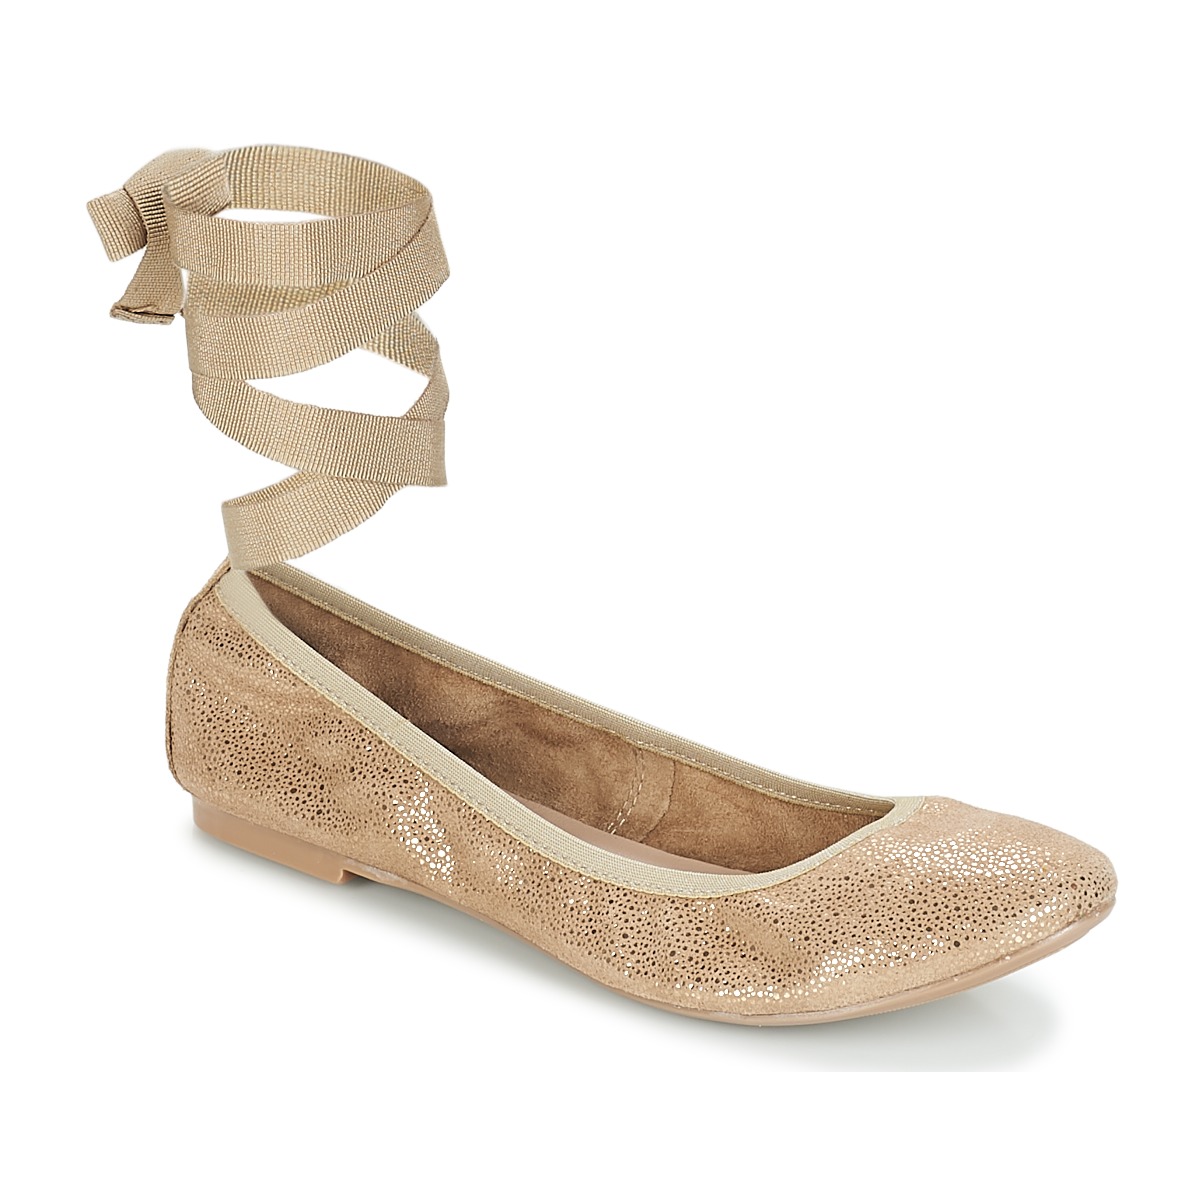 Shoes Women Ballerinas André ACTEE Taupe